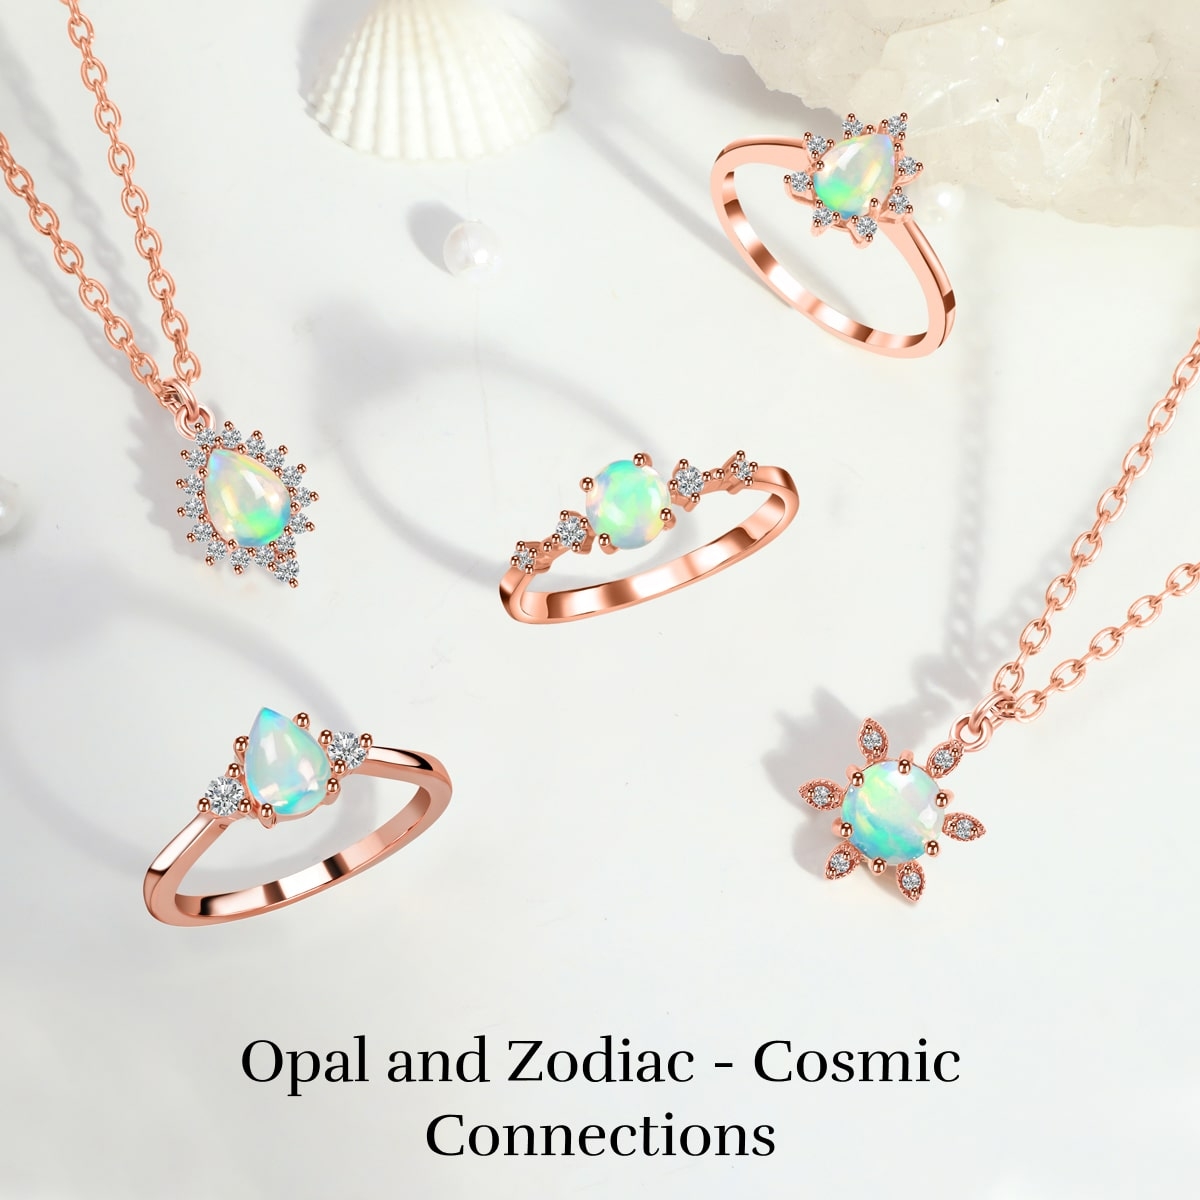 Opal Associated With Zodiac Signs